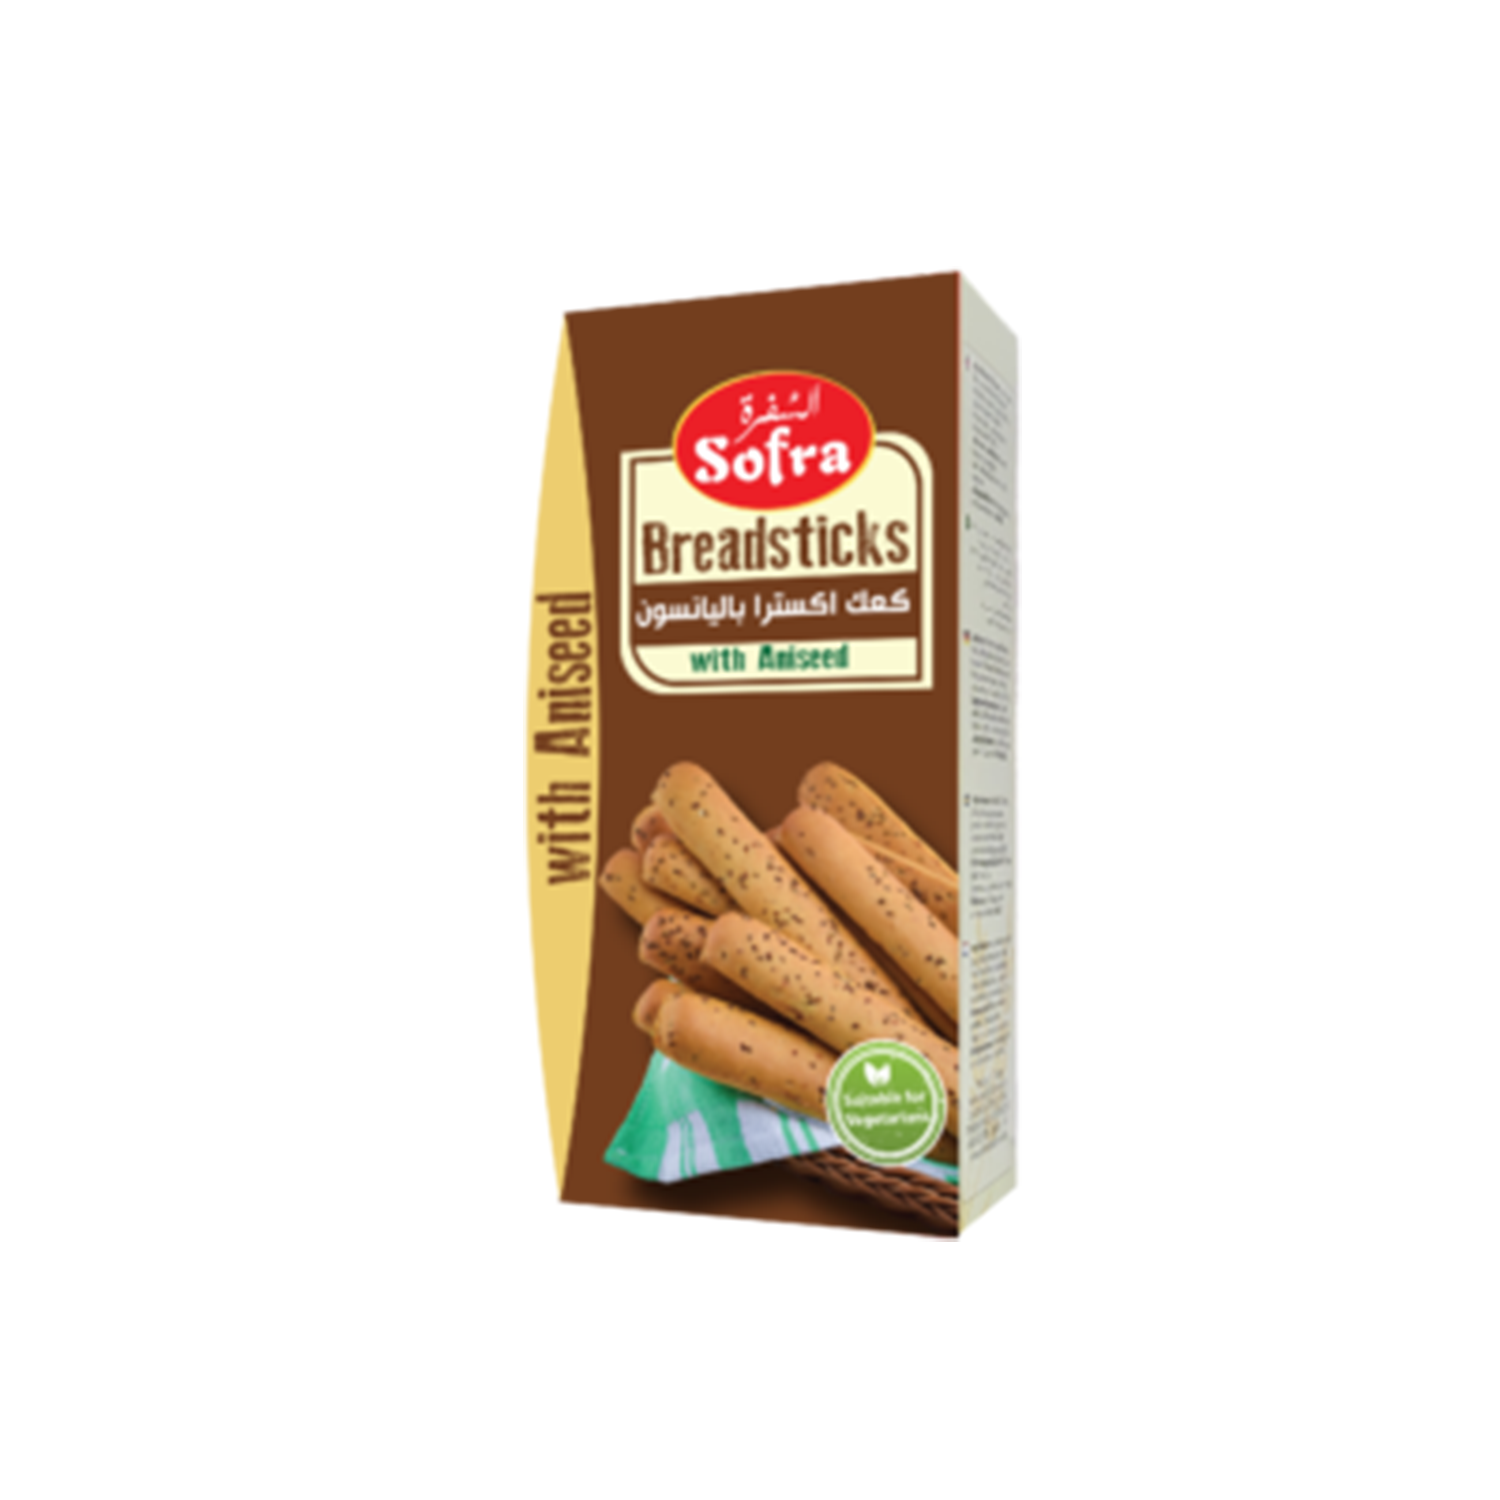 Sofra Bread Sticks With Aniseed 200g